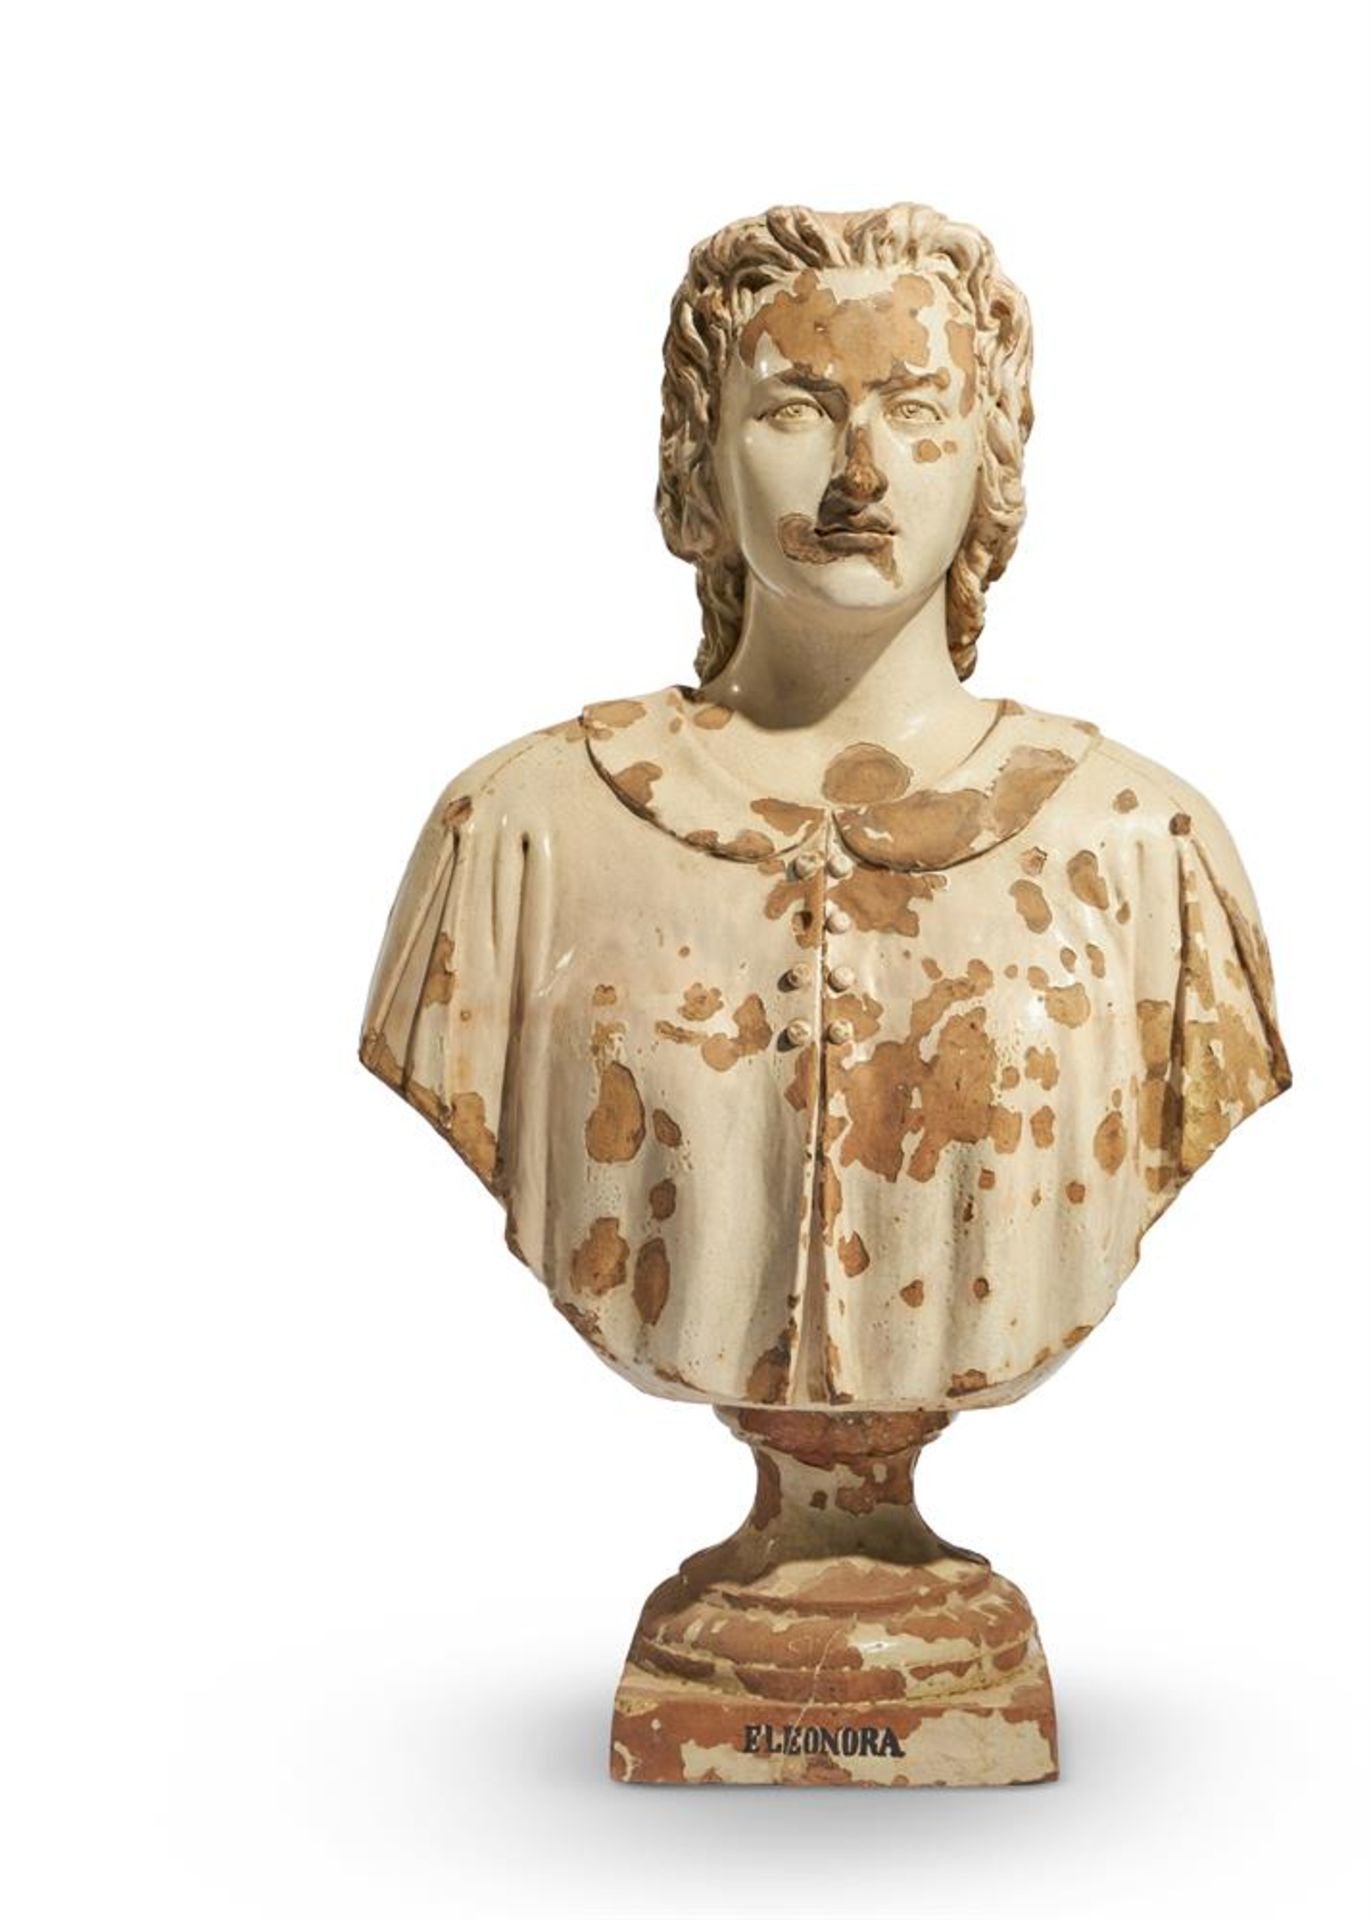 A SET OF SIX ITALIAN GLAZED TERRACOTTA BUSTS, MID-19TH CENTURY - Image 7 of 11